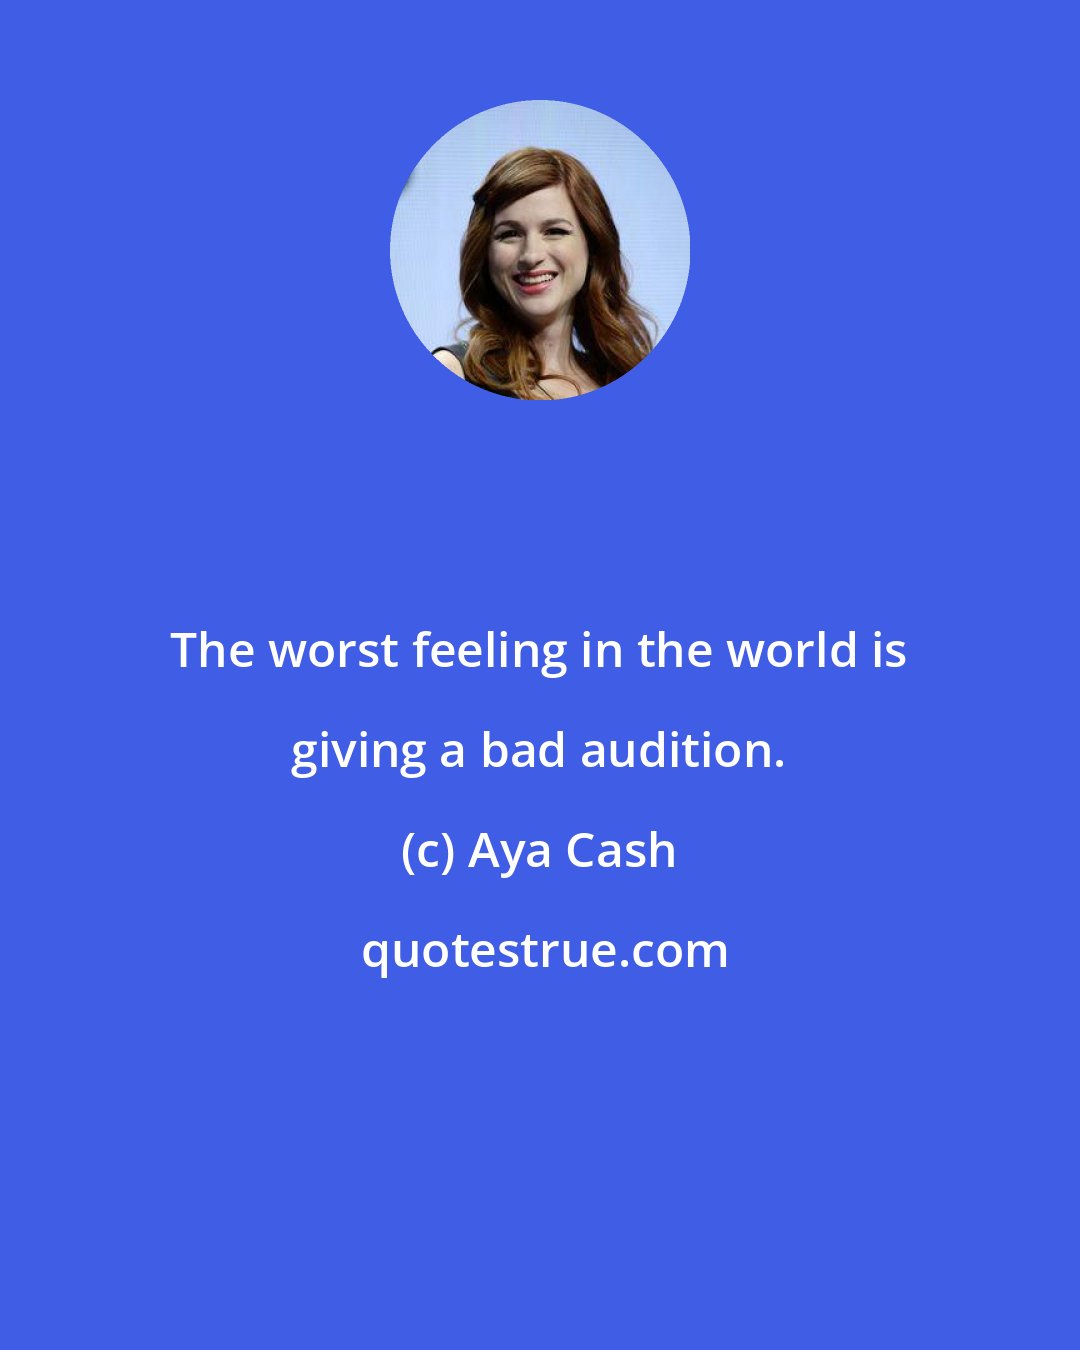 Aya Cash: The worst feeling in the world is giving a bad audition.